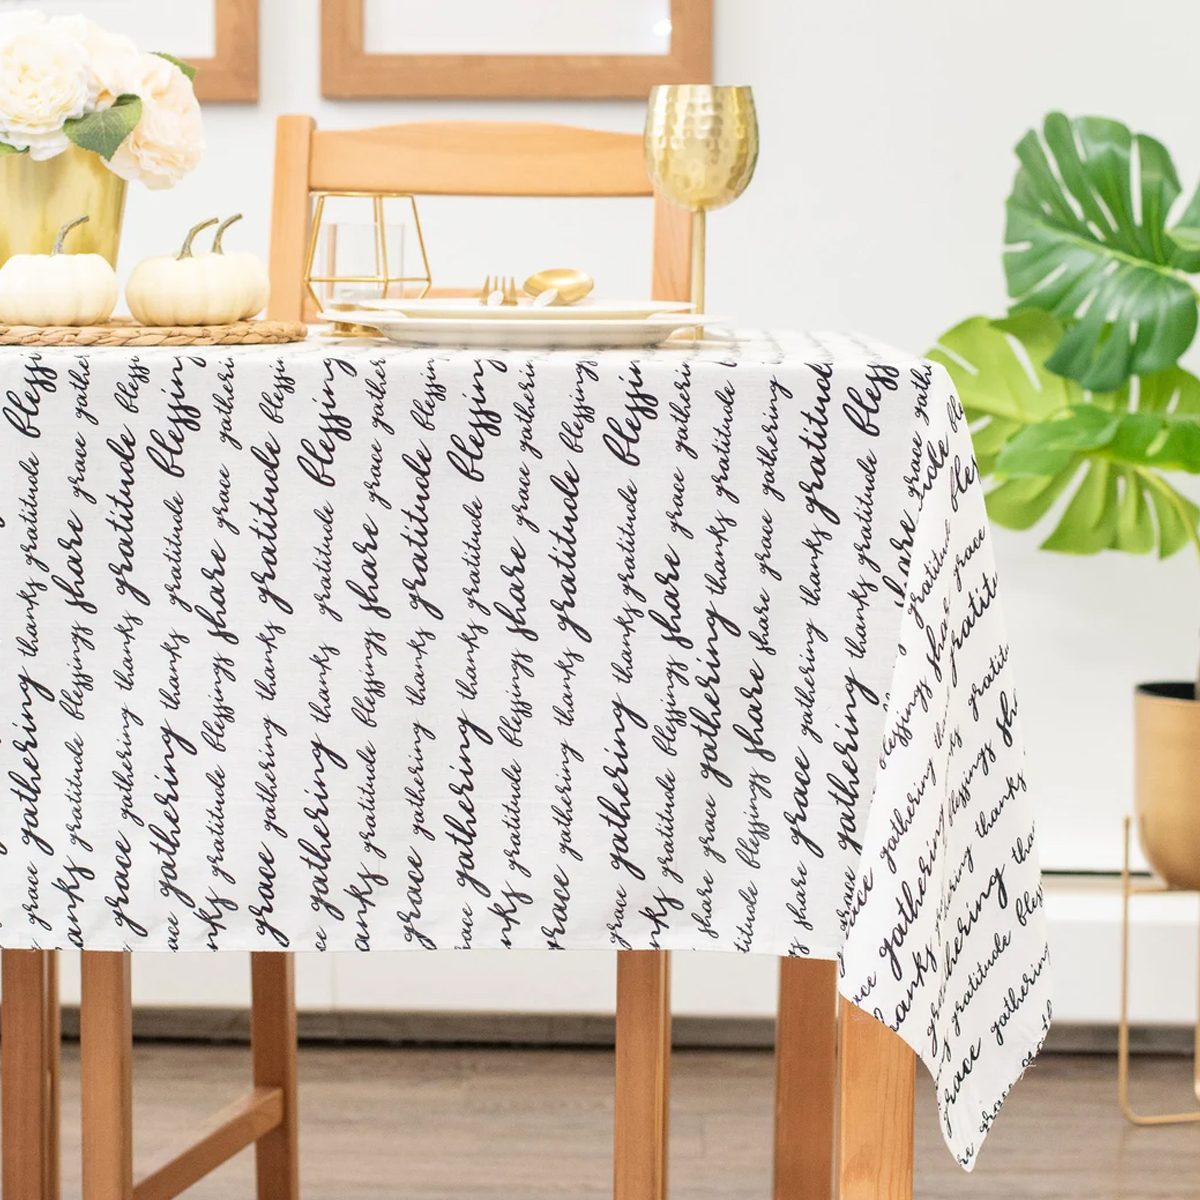 Thanksgiving Words Tablecloth